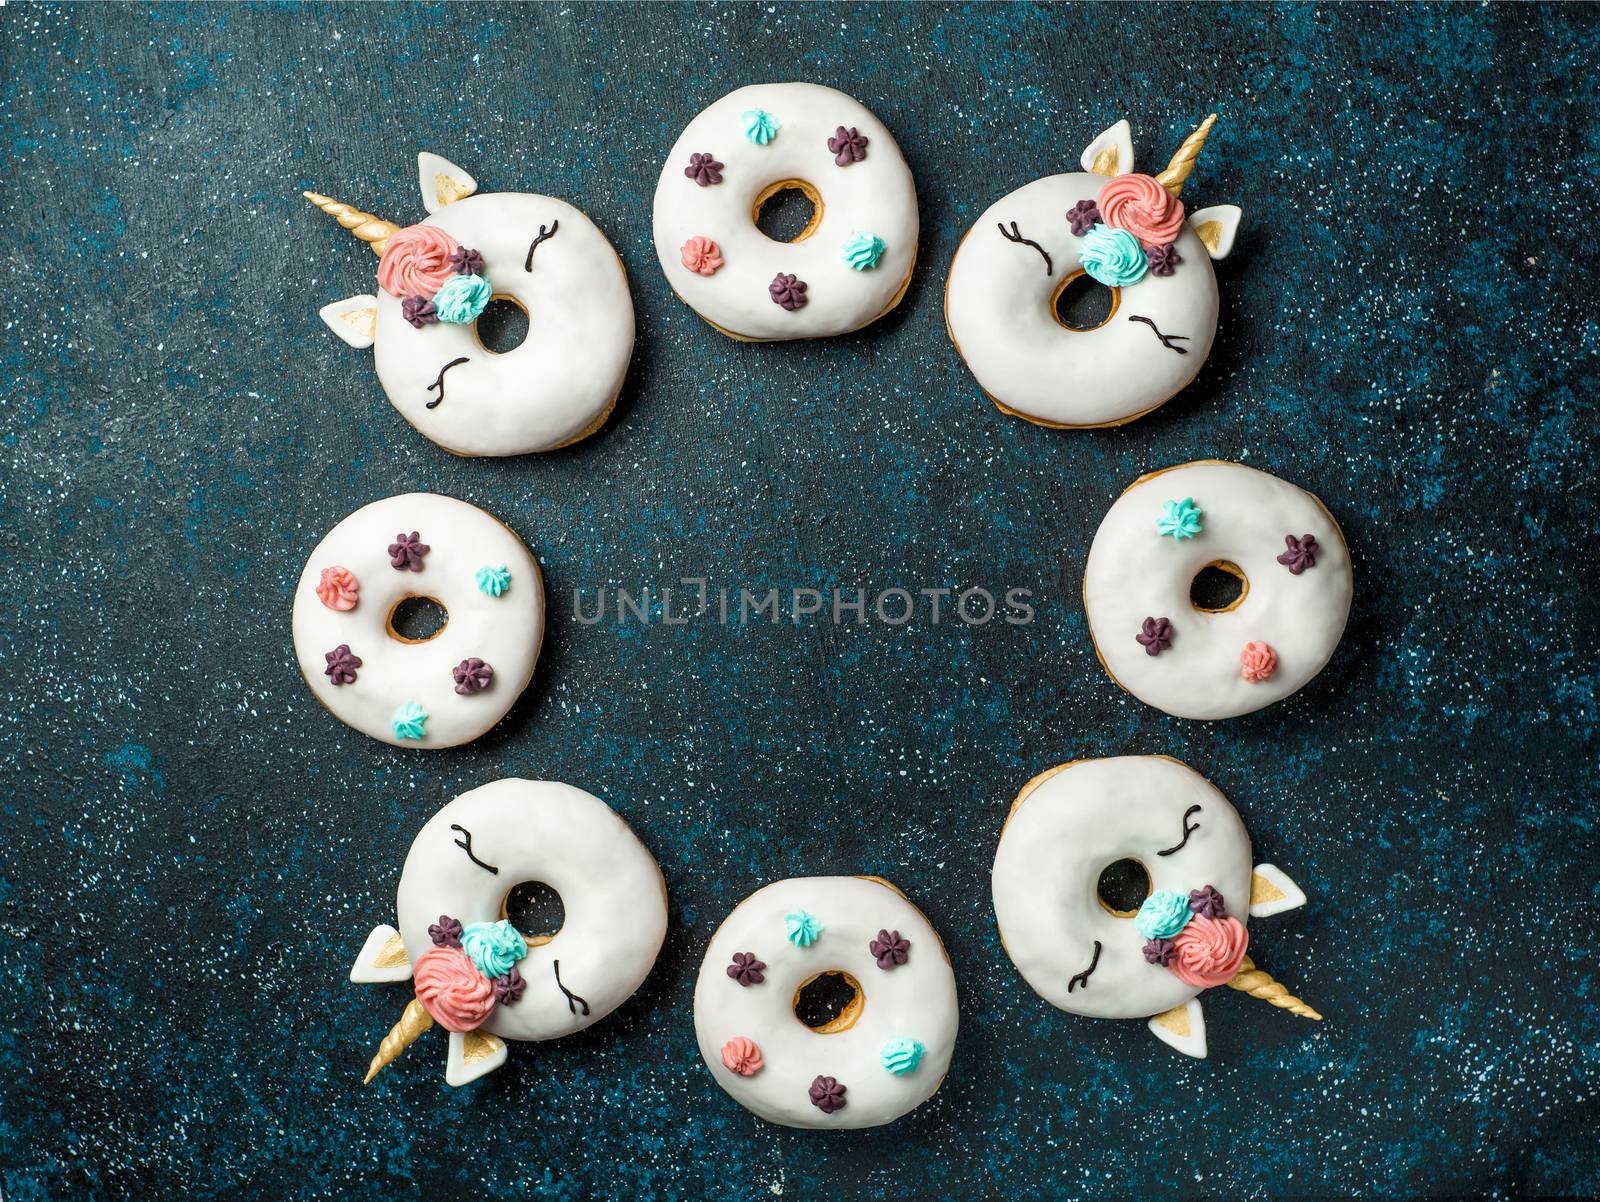 Unicorn donuts over dark background. Trendy donut unicorn with white glaze in circle shape. Top view or flat lay. Copy space for text.